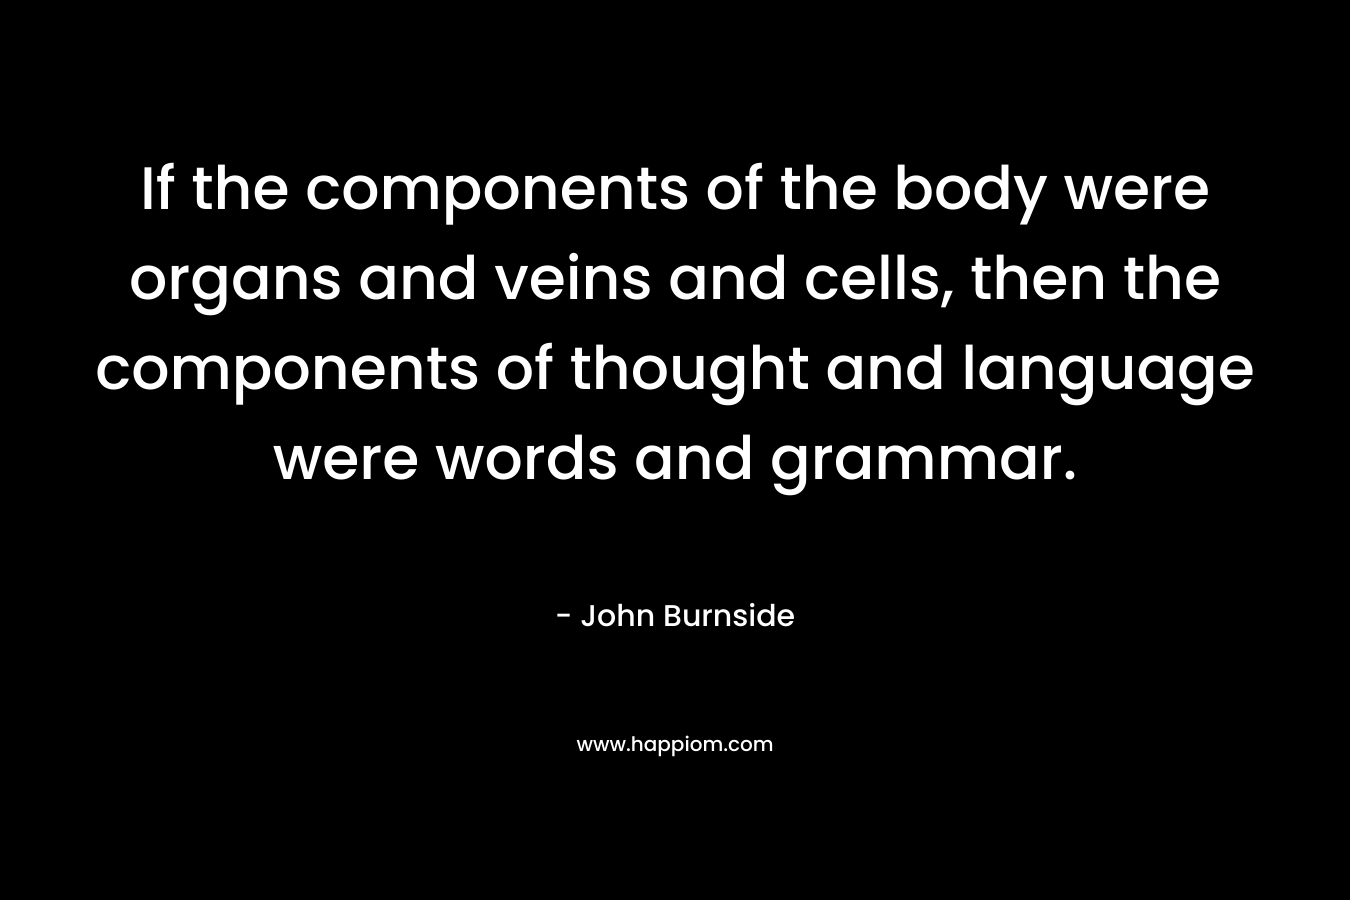 If the components of the body were organs and veins and cells, then the components of thought and language were words and grammar.